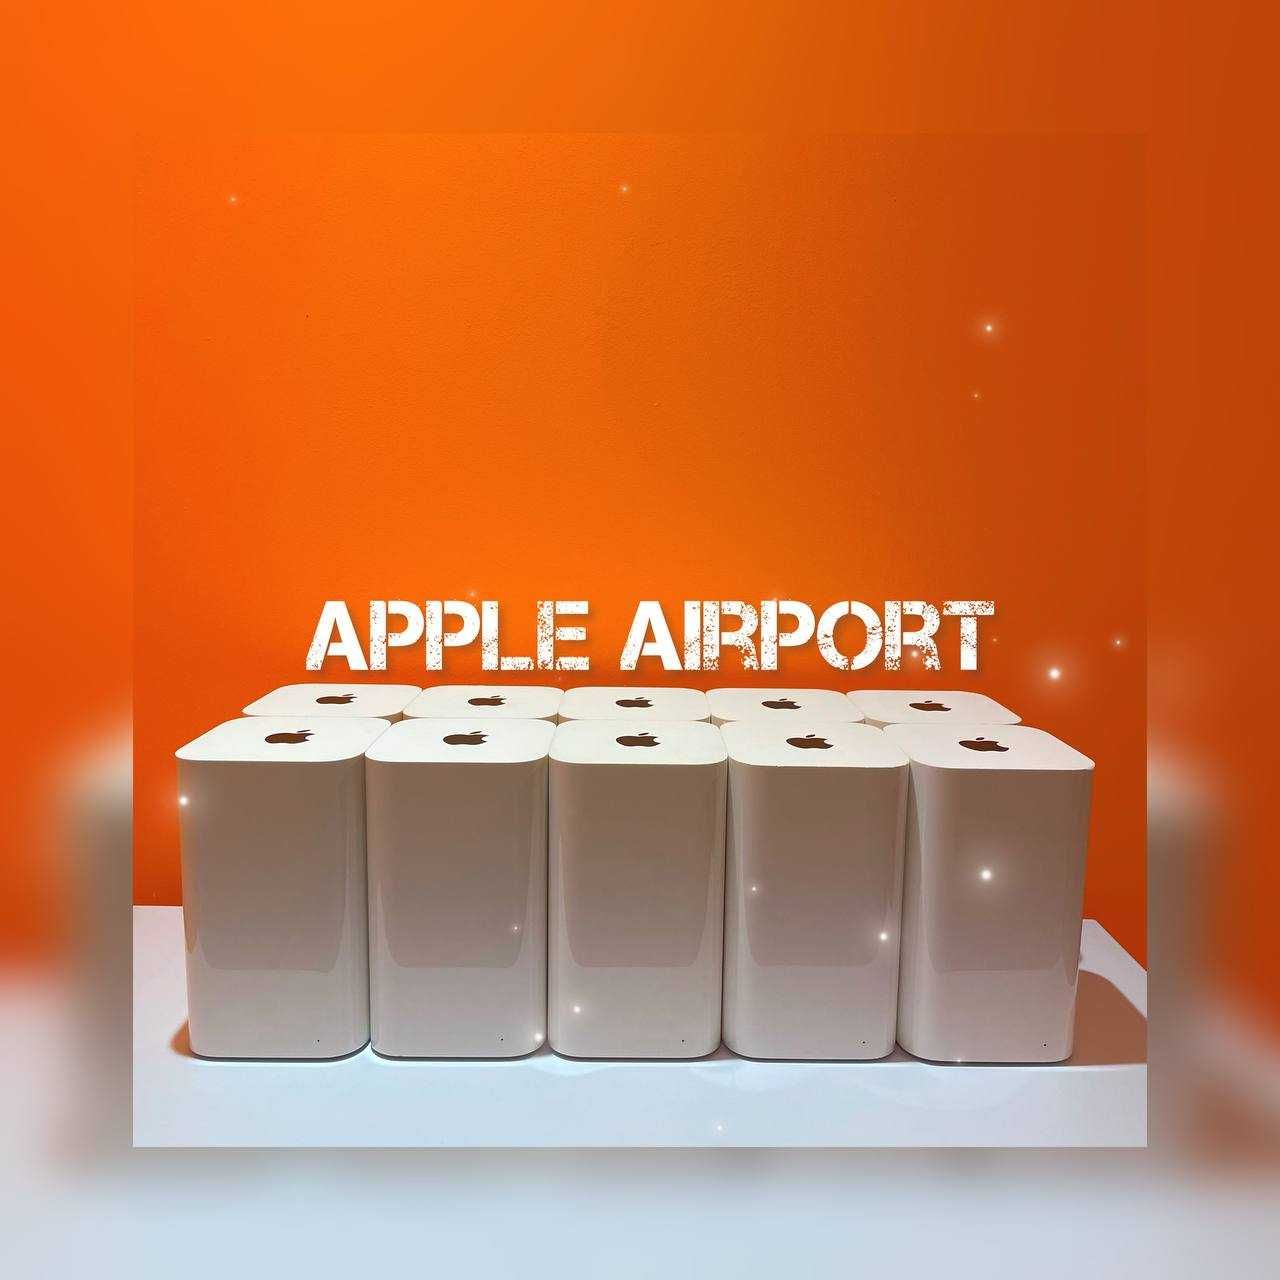 Apple AirPort Extreme 6th Gen A1521 WiFi роутер маршрутизатор модем